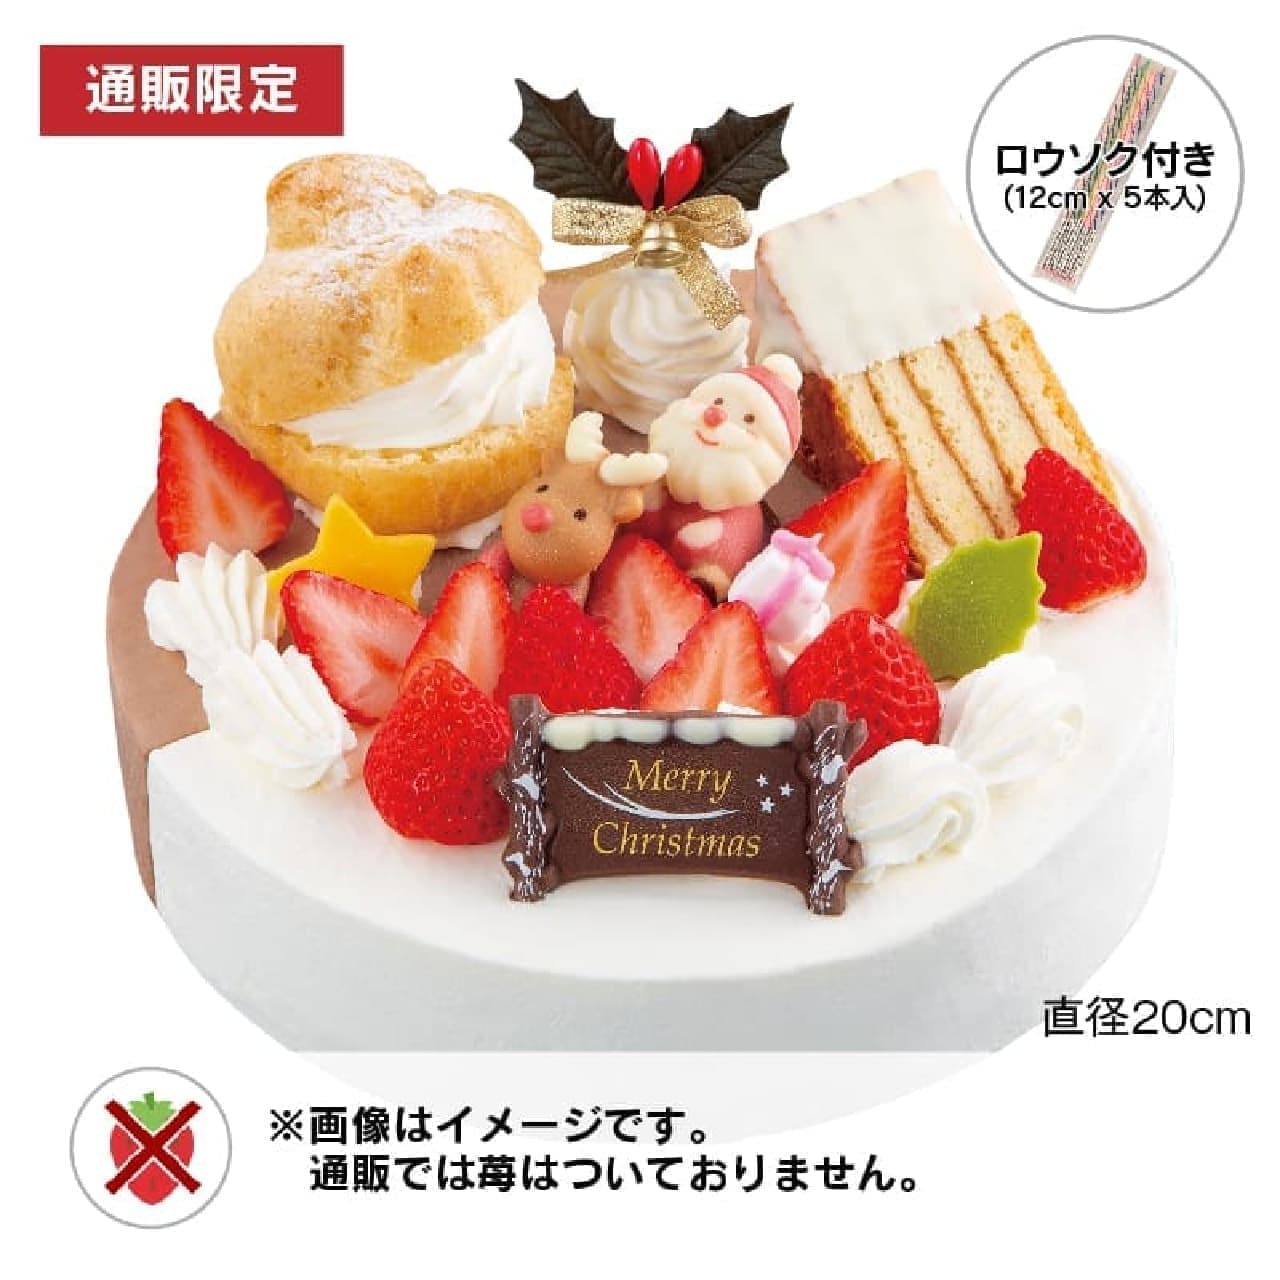 Chateraise "[Mail order] Xmas 2-taste decoration 20cm (without strawberries)